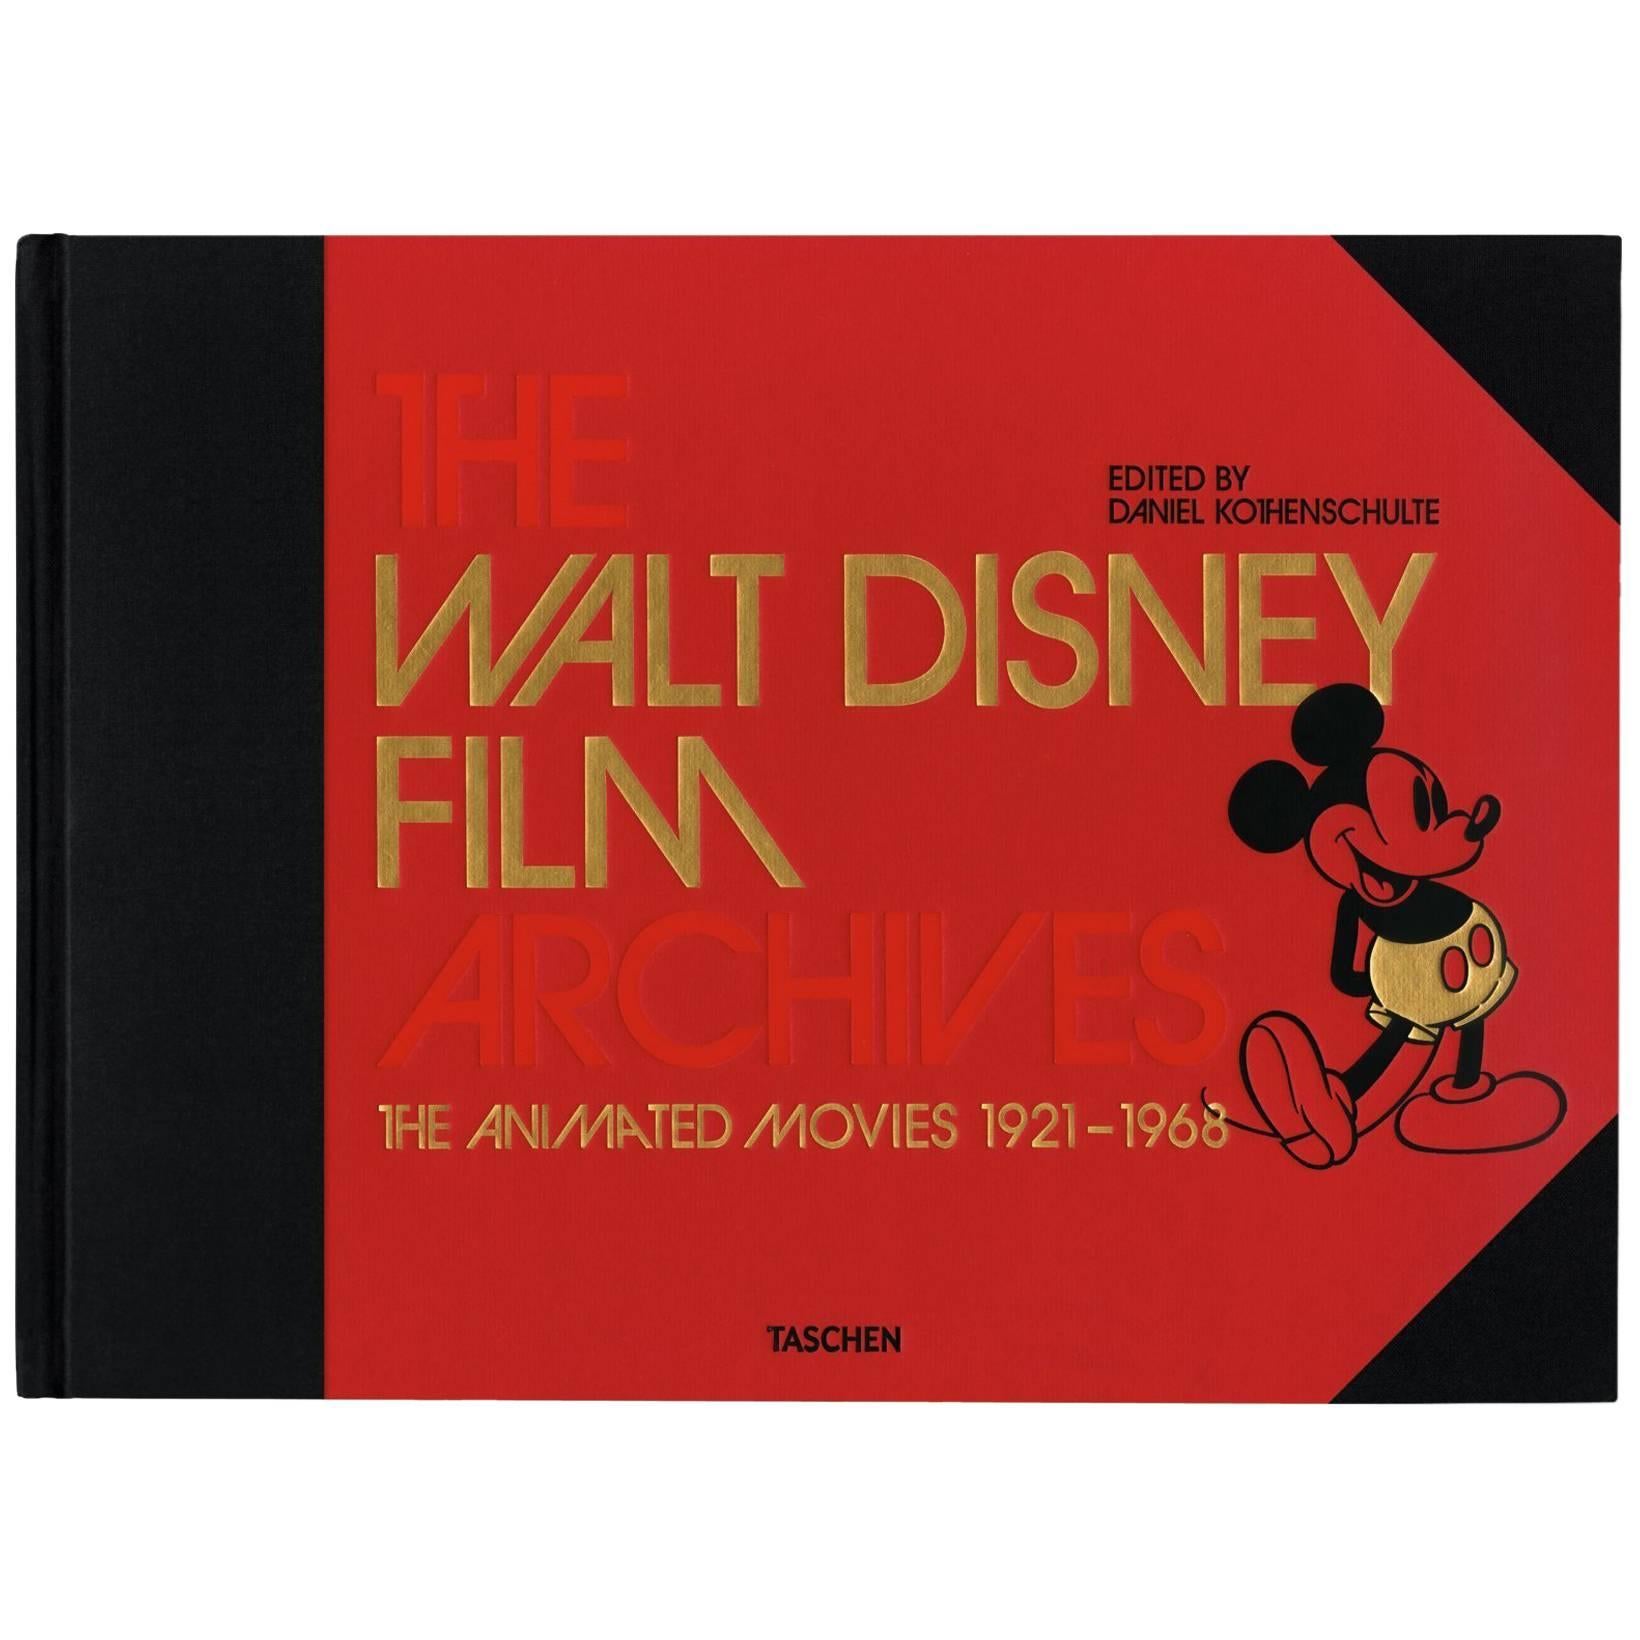 Walt Disney Film Archives, the Animated Movies, 1921-1968